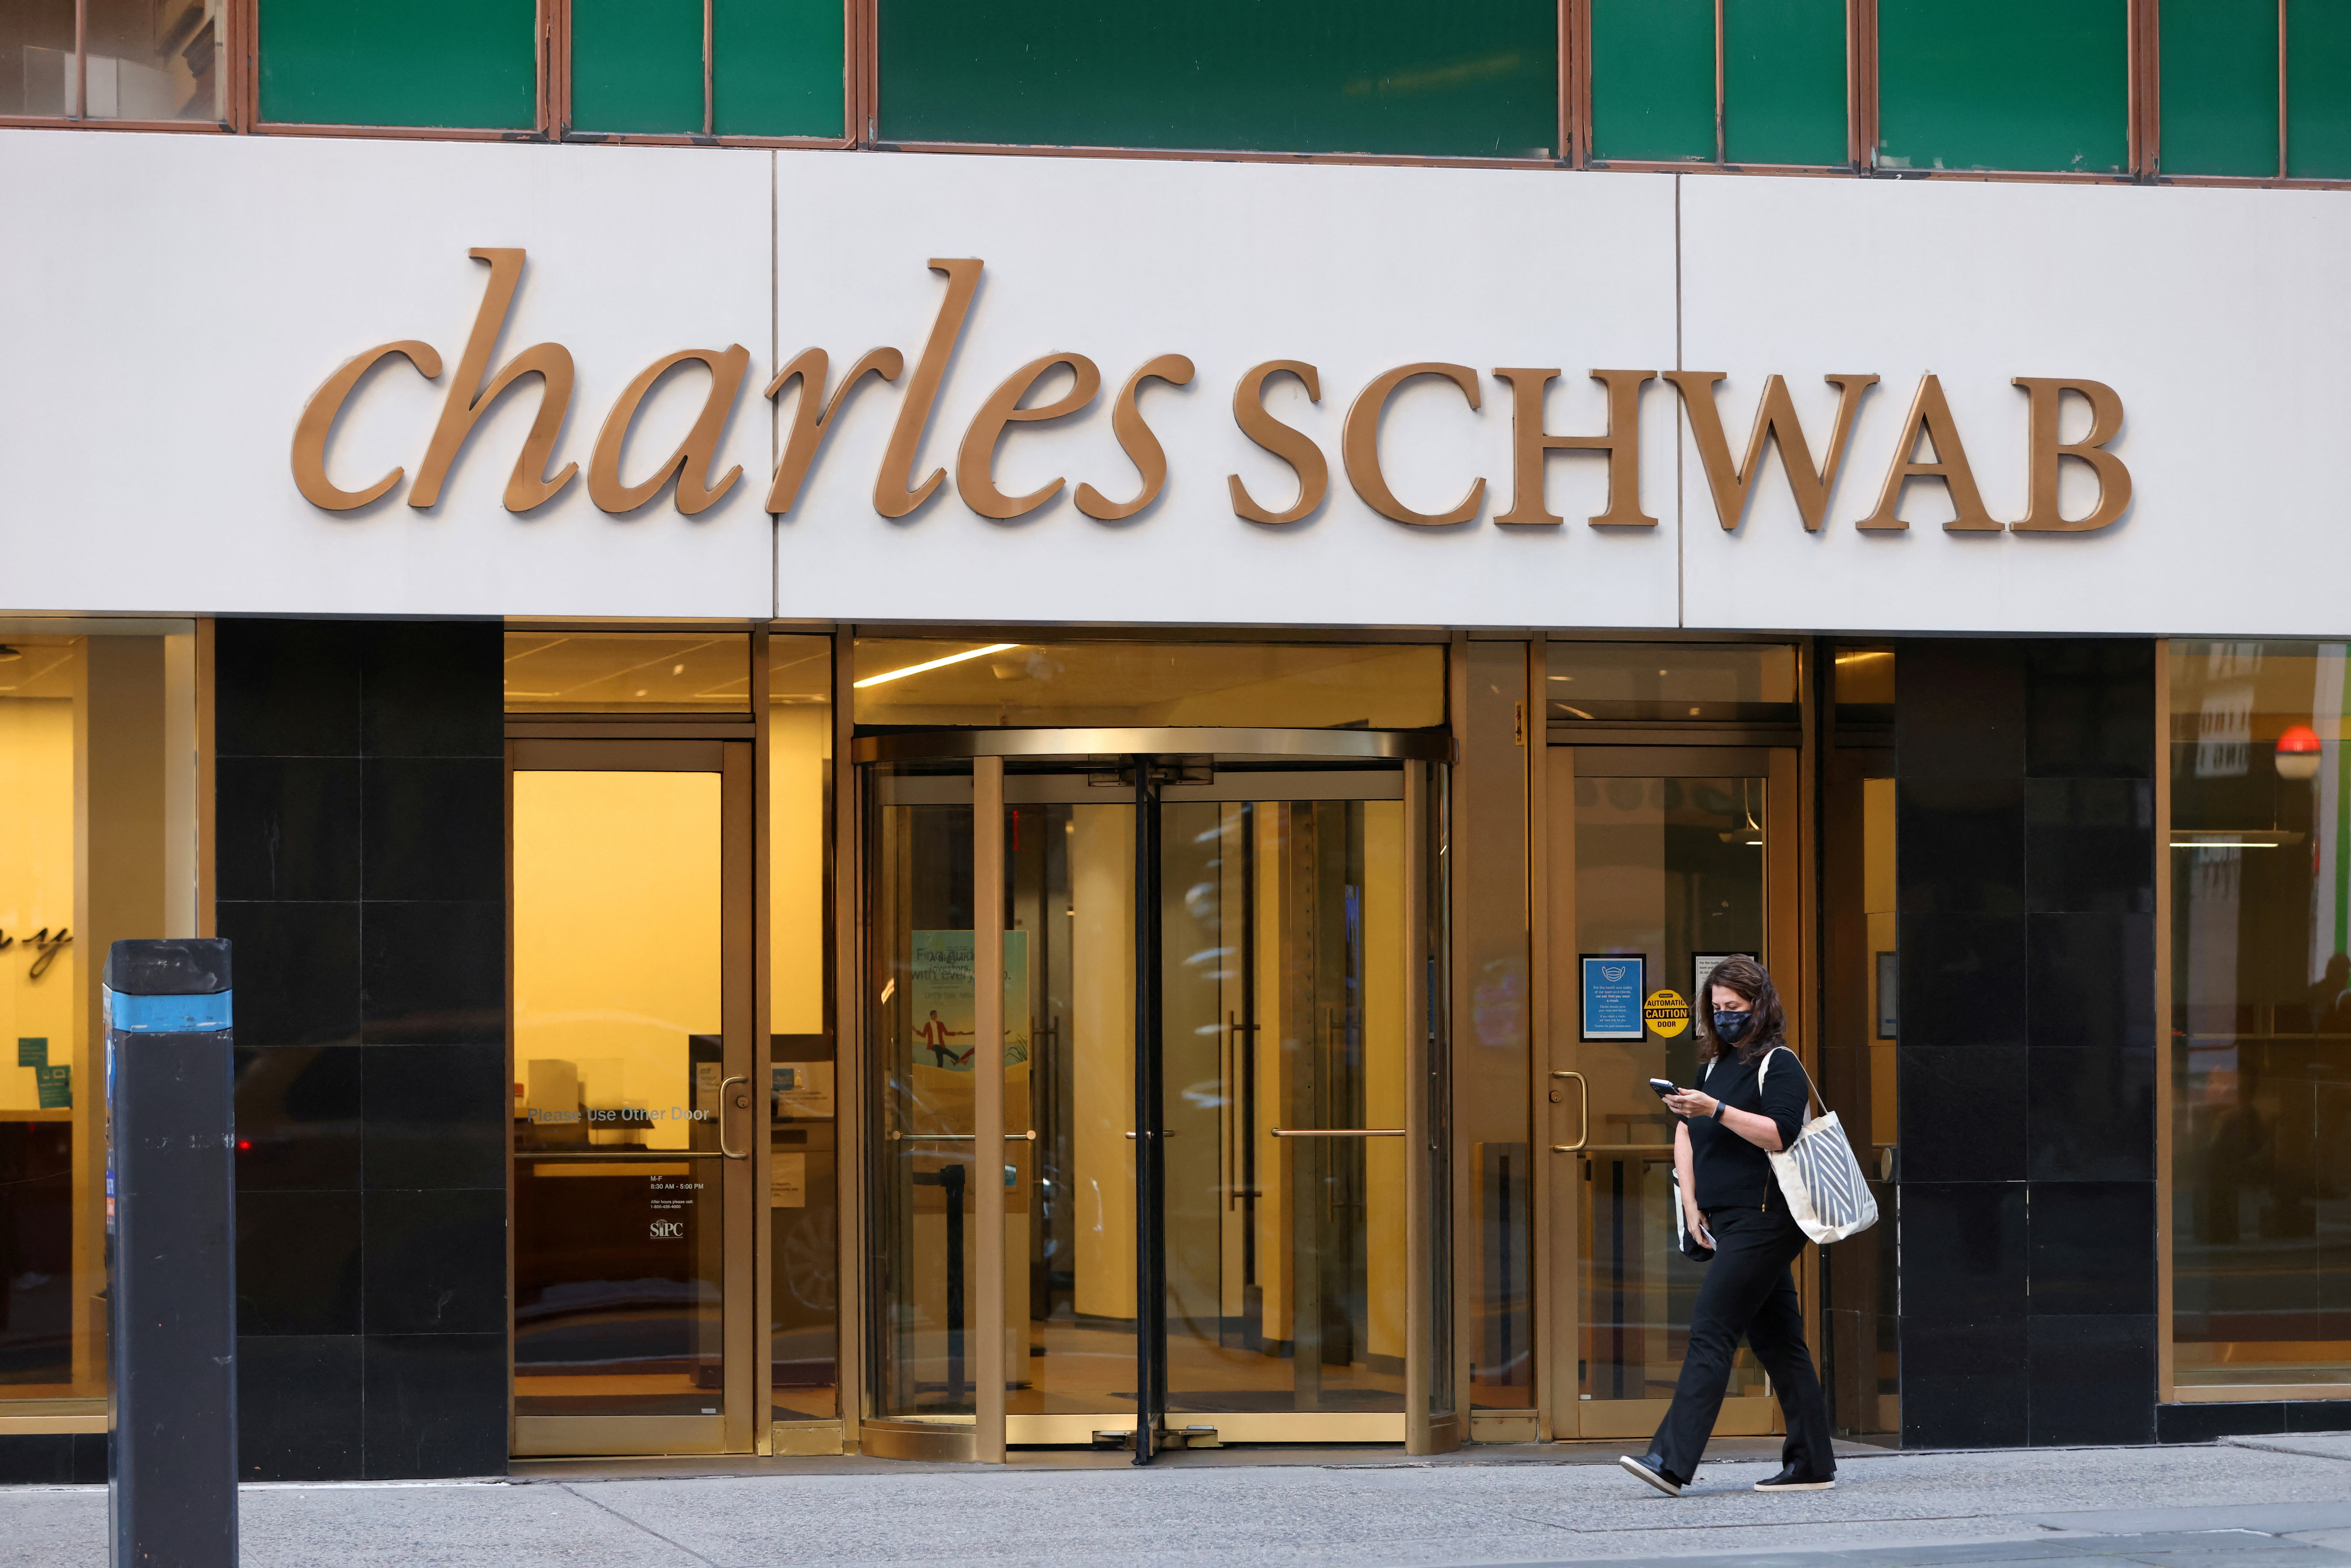 A view of the Charles Schwab office location in Manhattan, New York